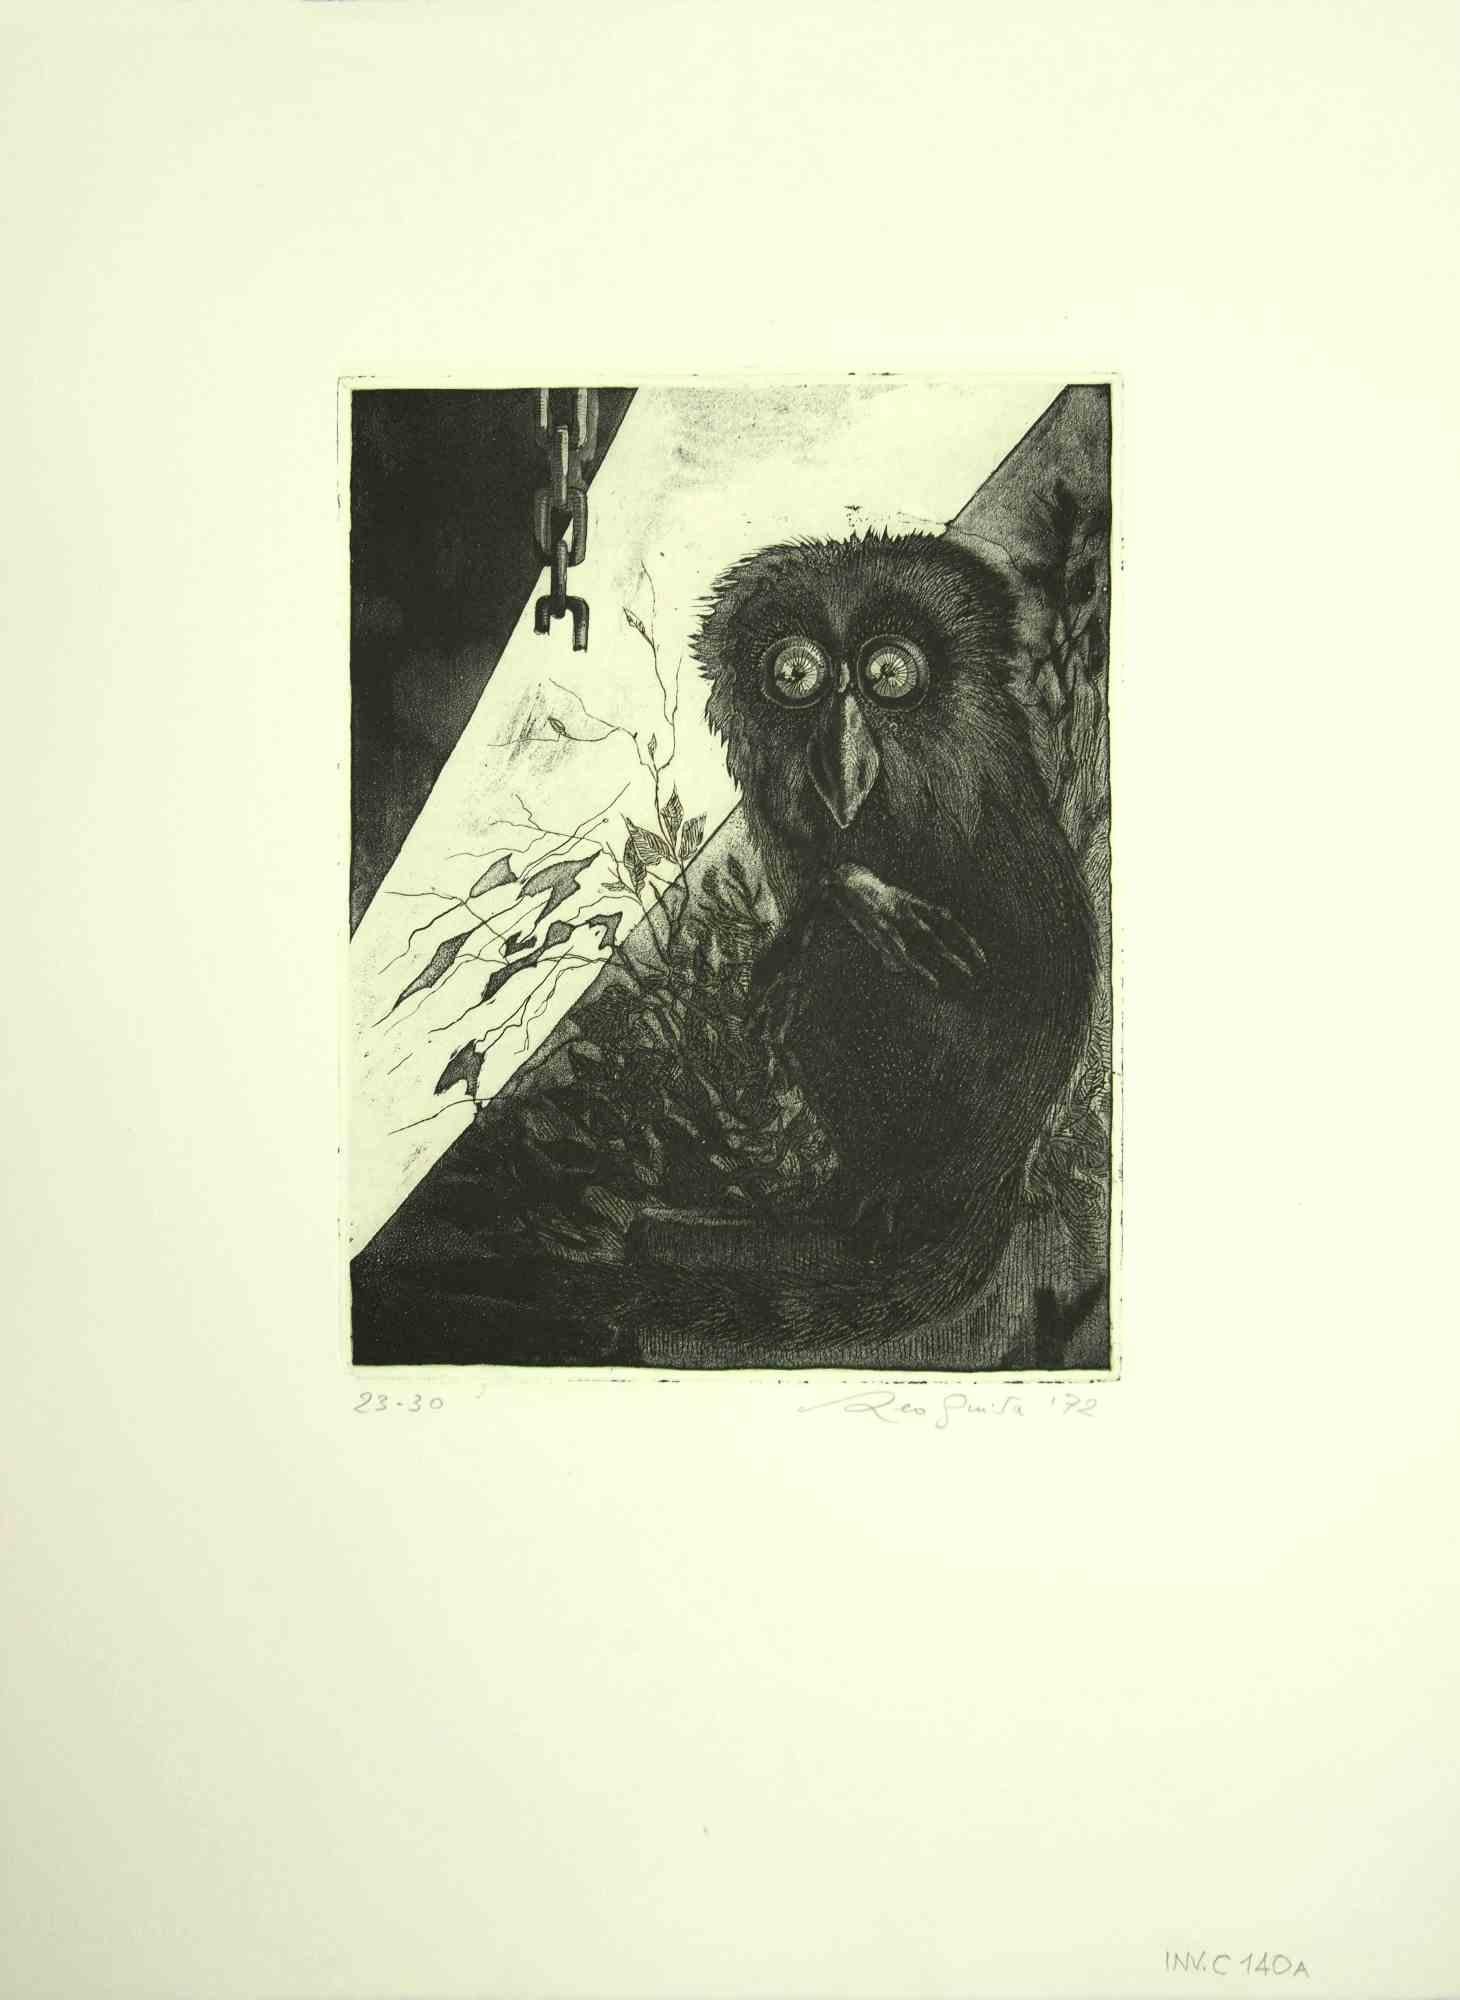 The Owl is an original etching print realized by Leo Guida in 1972.

Hand-signed on the lower right and dated in pencil. Artist's proof, from the edition of 30 prints.

Good condition.

Leo Guida  (1992 - 2017). Sensitive to current issues, artistic